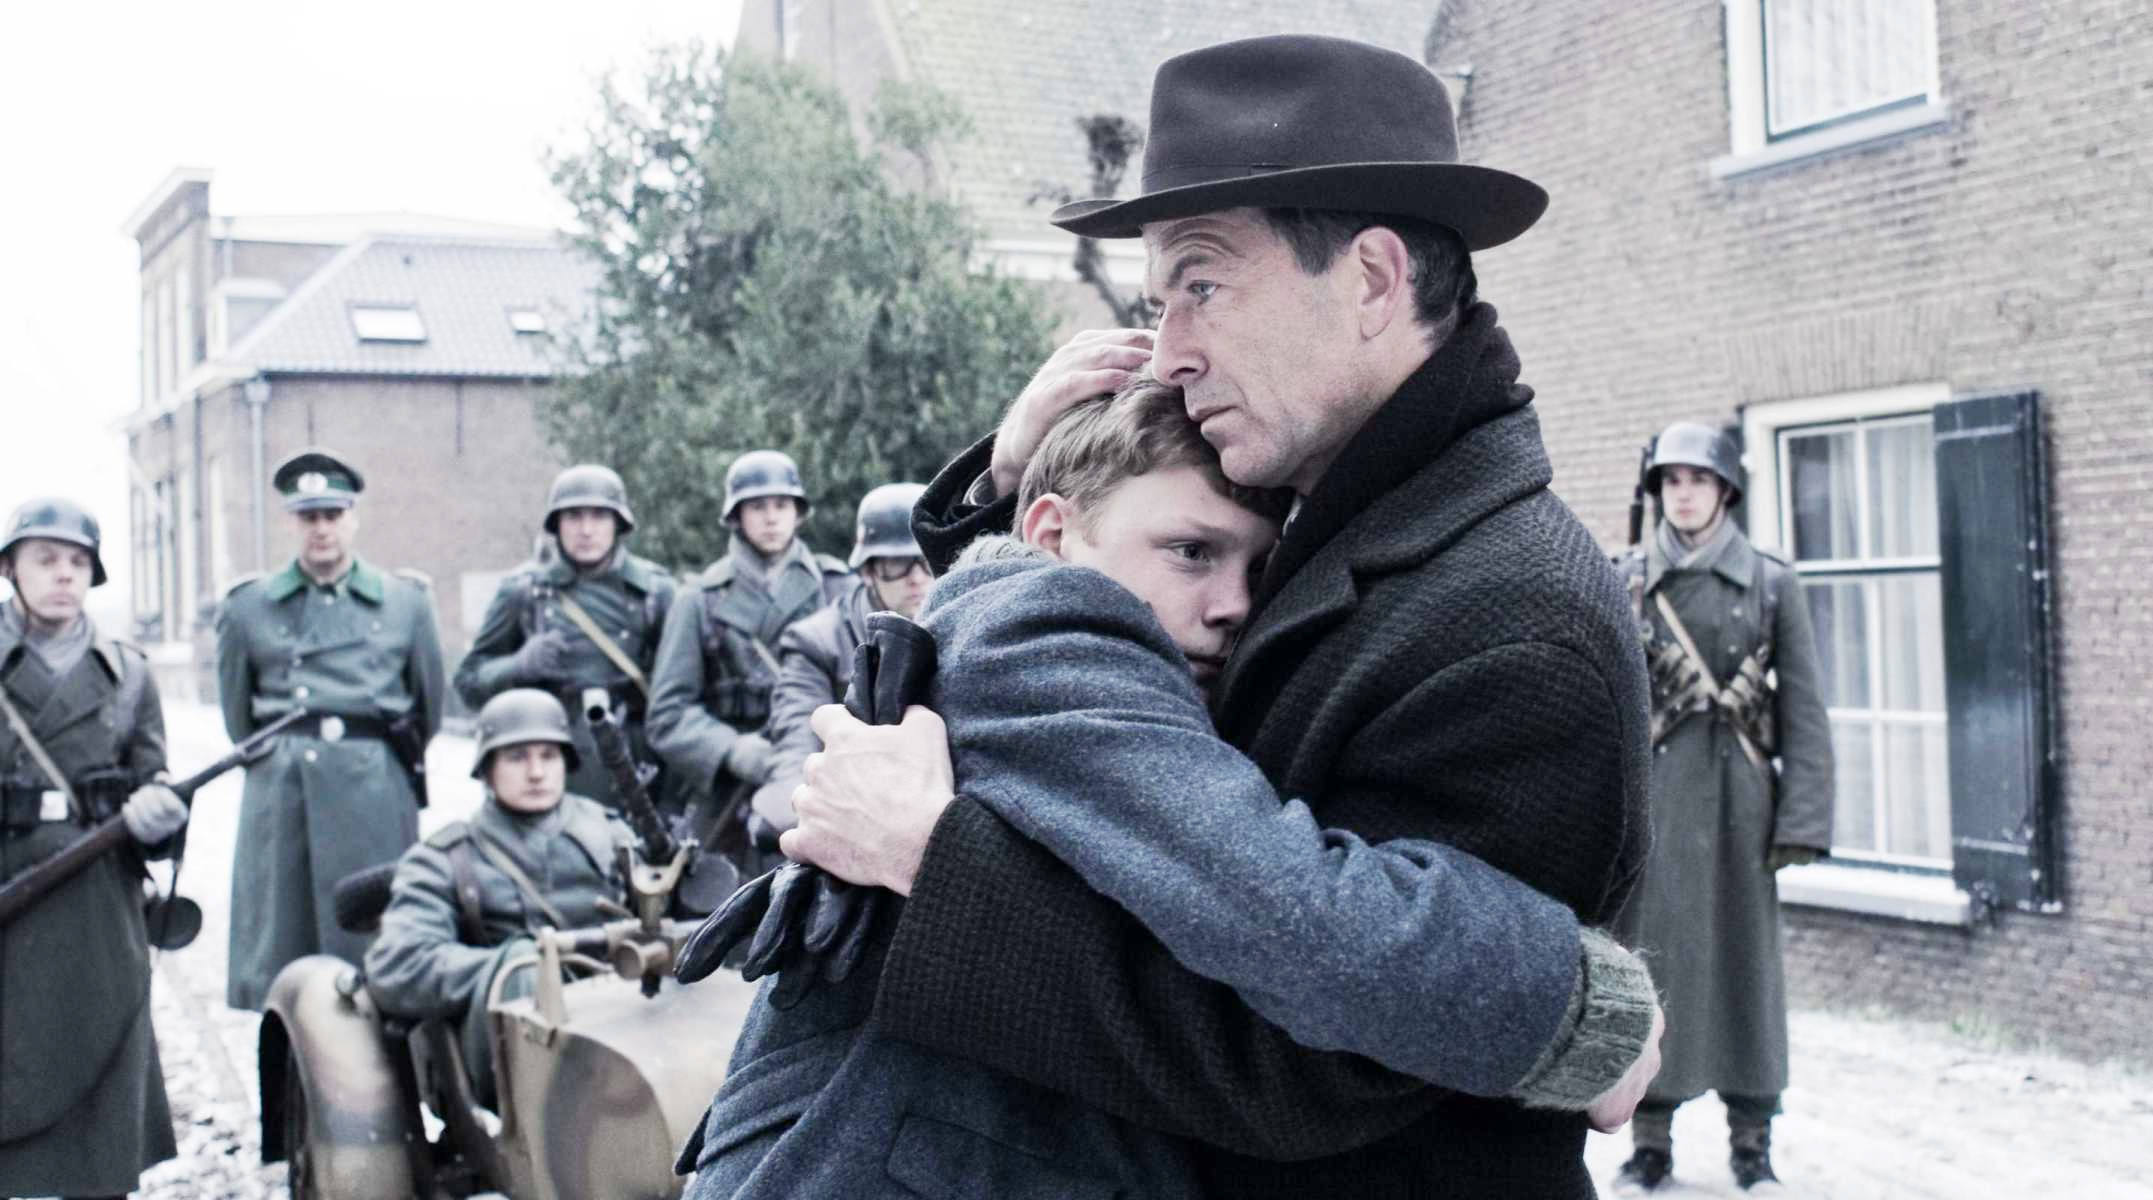 Martijn Lakemeier stars as Michiel and Raymond Thiry stars as Johan in Sony Pictures Classics' Winter in Wartime (2011)